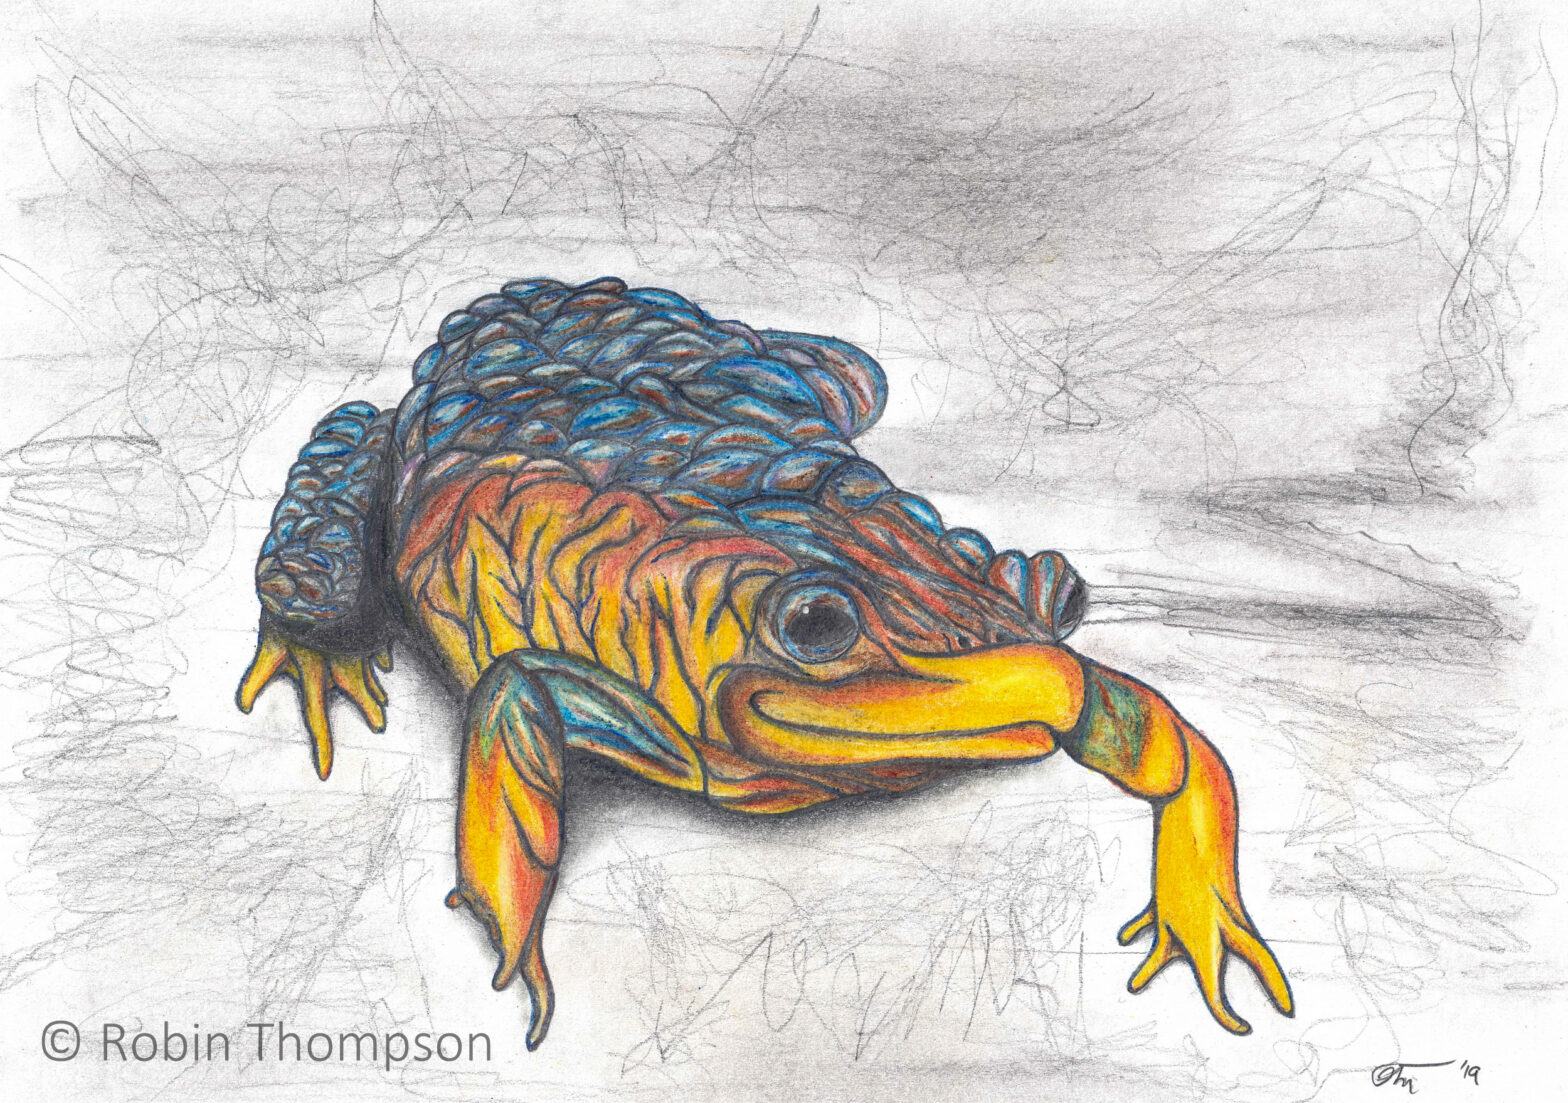 A drawing of a sunset frog, looking towards the viewer in a friendly manner. The frog is coloured in yellows, reds and blues.